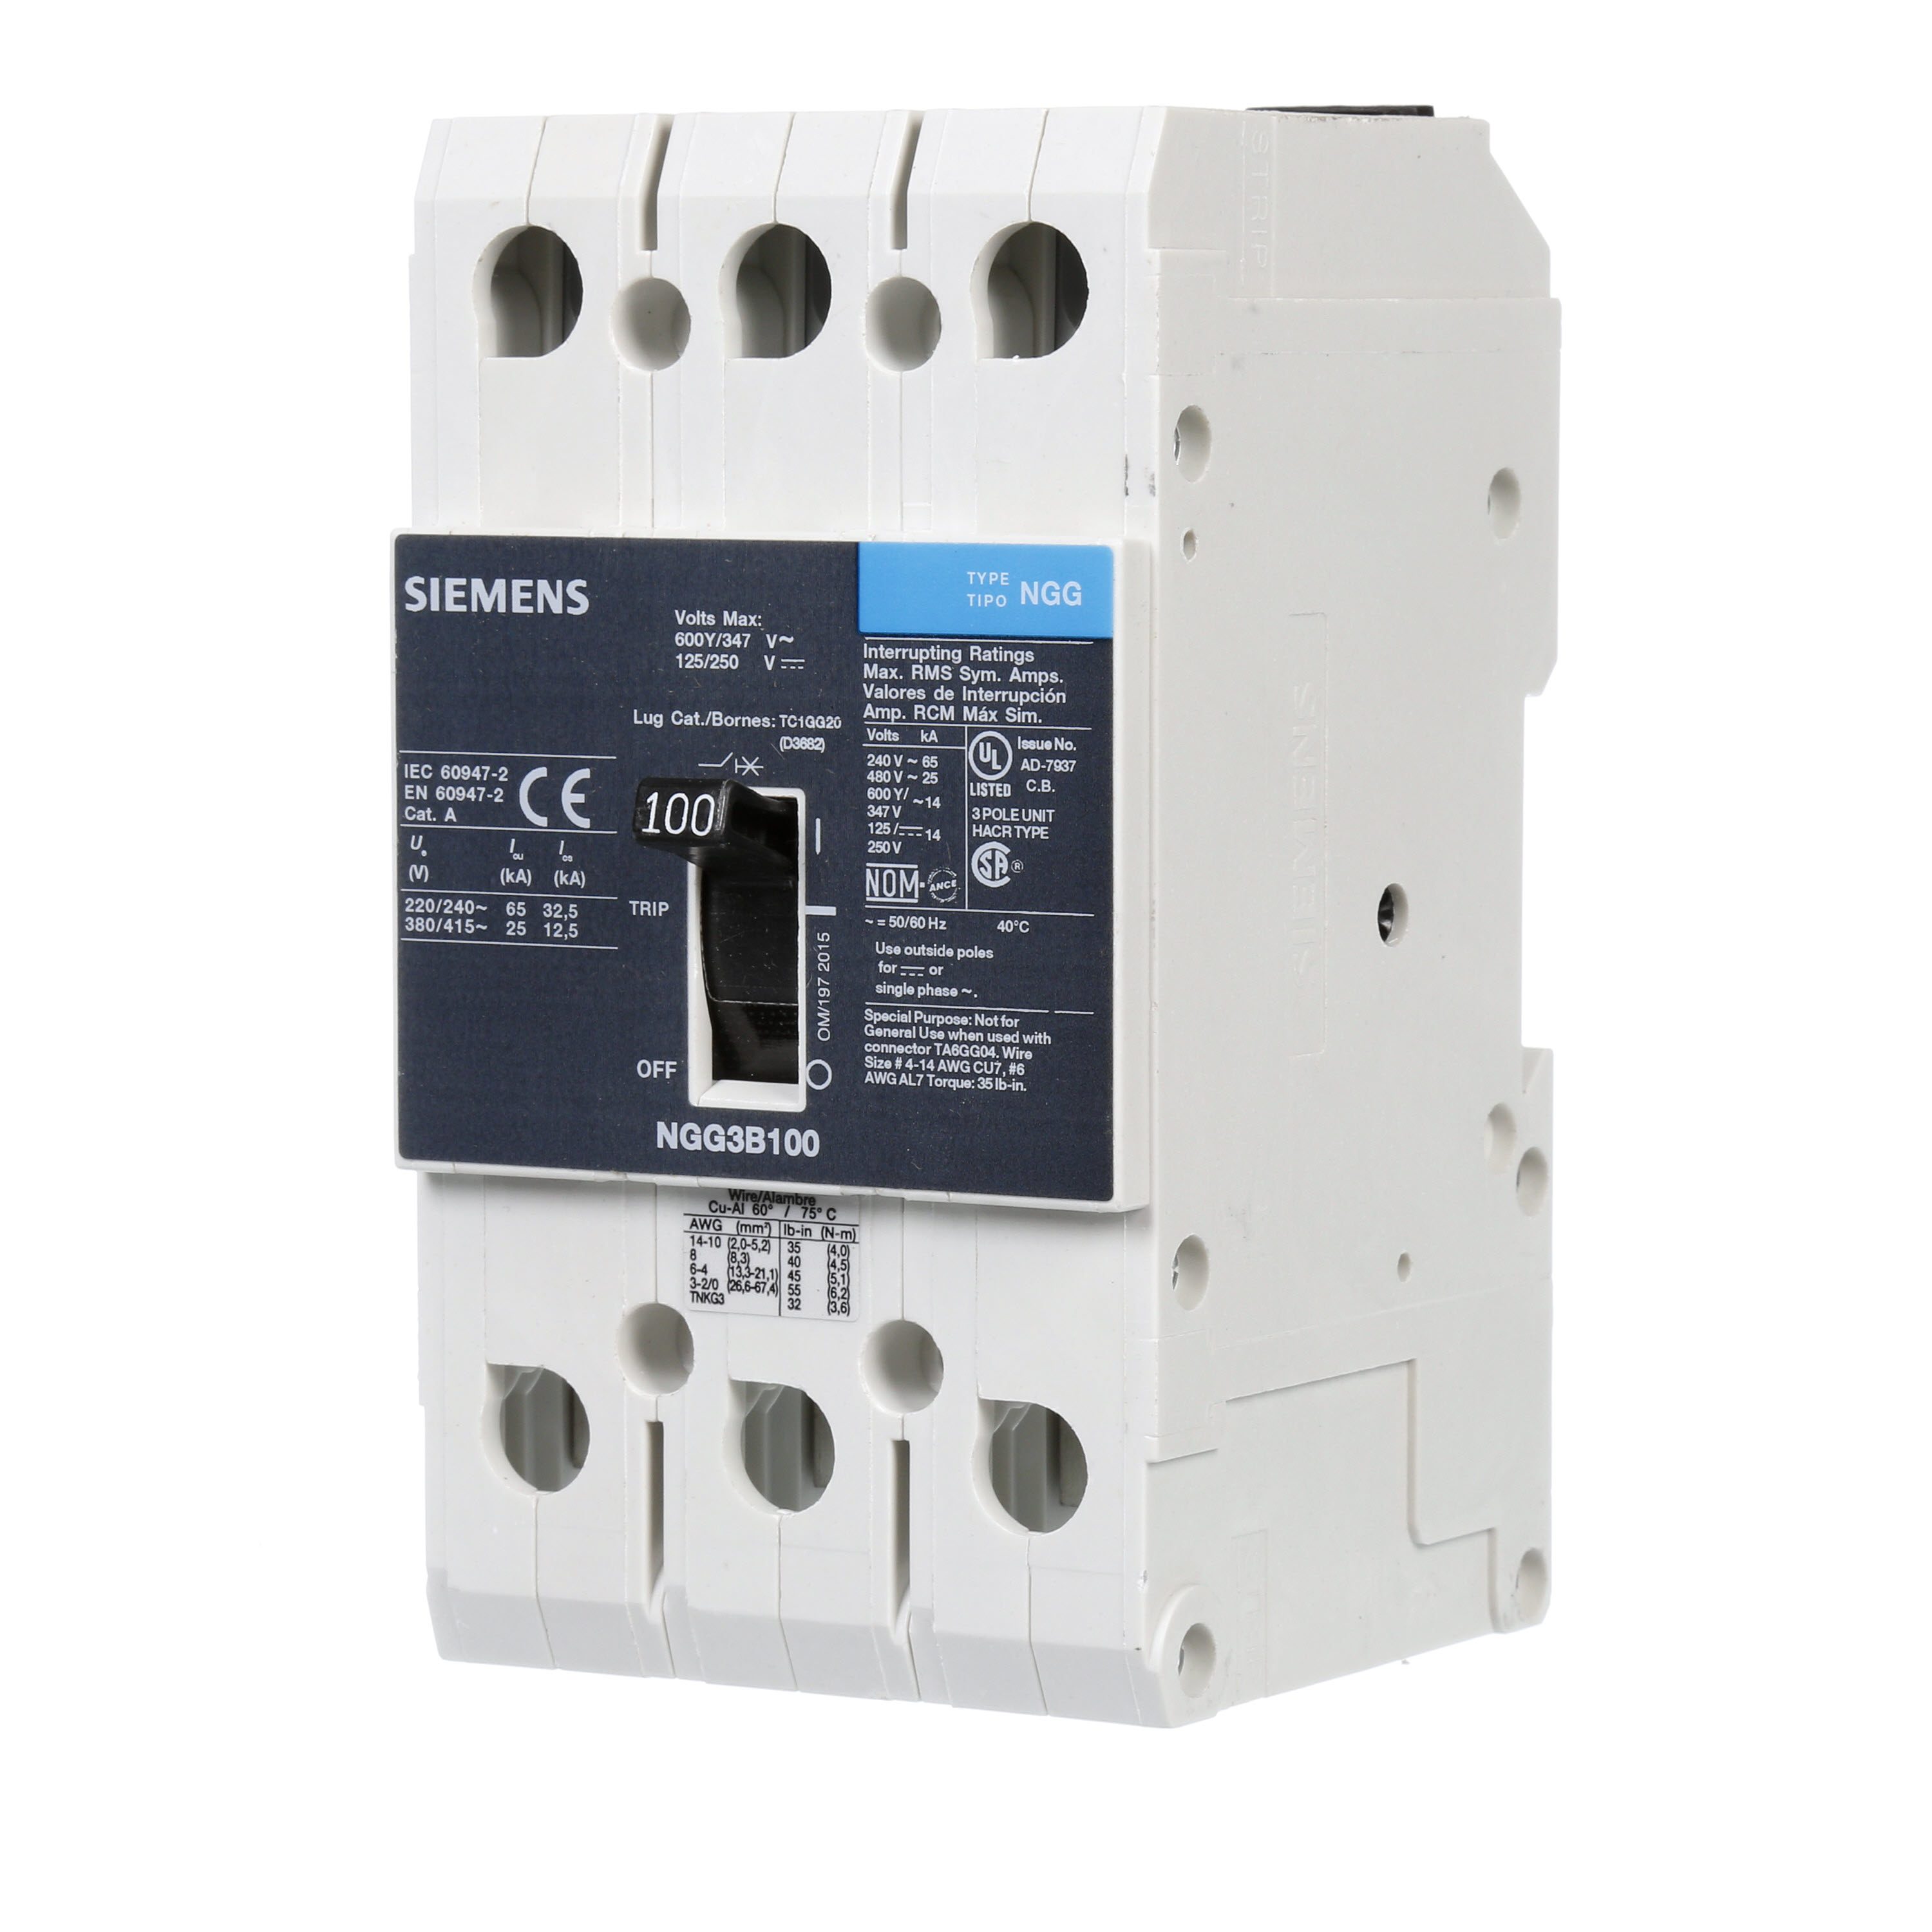 SIEMENS LOW VOLTAGE G FRAME CIRCUIT BREAKER WITH THERMAL - MAGNETIC TRIP. UL LISTED NGG FRAME WITH STANDARD BREAKING CAPACITY. 100A 3-POLE (14KAIC AT 600Y/347V) (25KAIC AT 480V). SPECIAL FEATURES MOUNTS ON DIN RAIL / SCREW, LINE AND LOAD SIDE LUGS (TC1GG20) WIRE RANGE 8 - 1/0 AWS (CU/AL). DIMENSIONS (W x H x D) IN 3 x5.4 x 2.8.